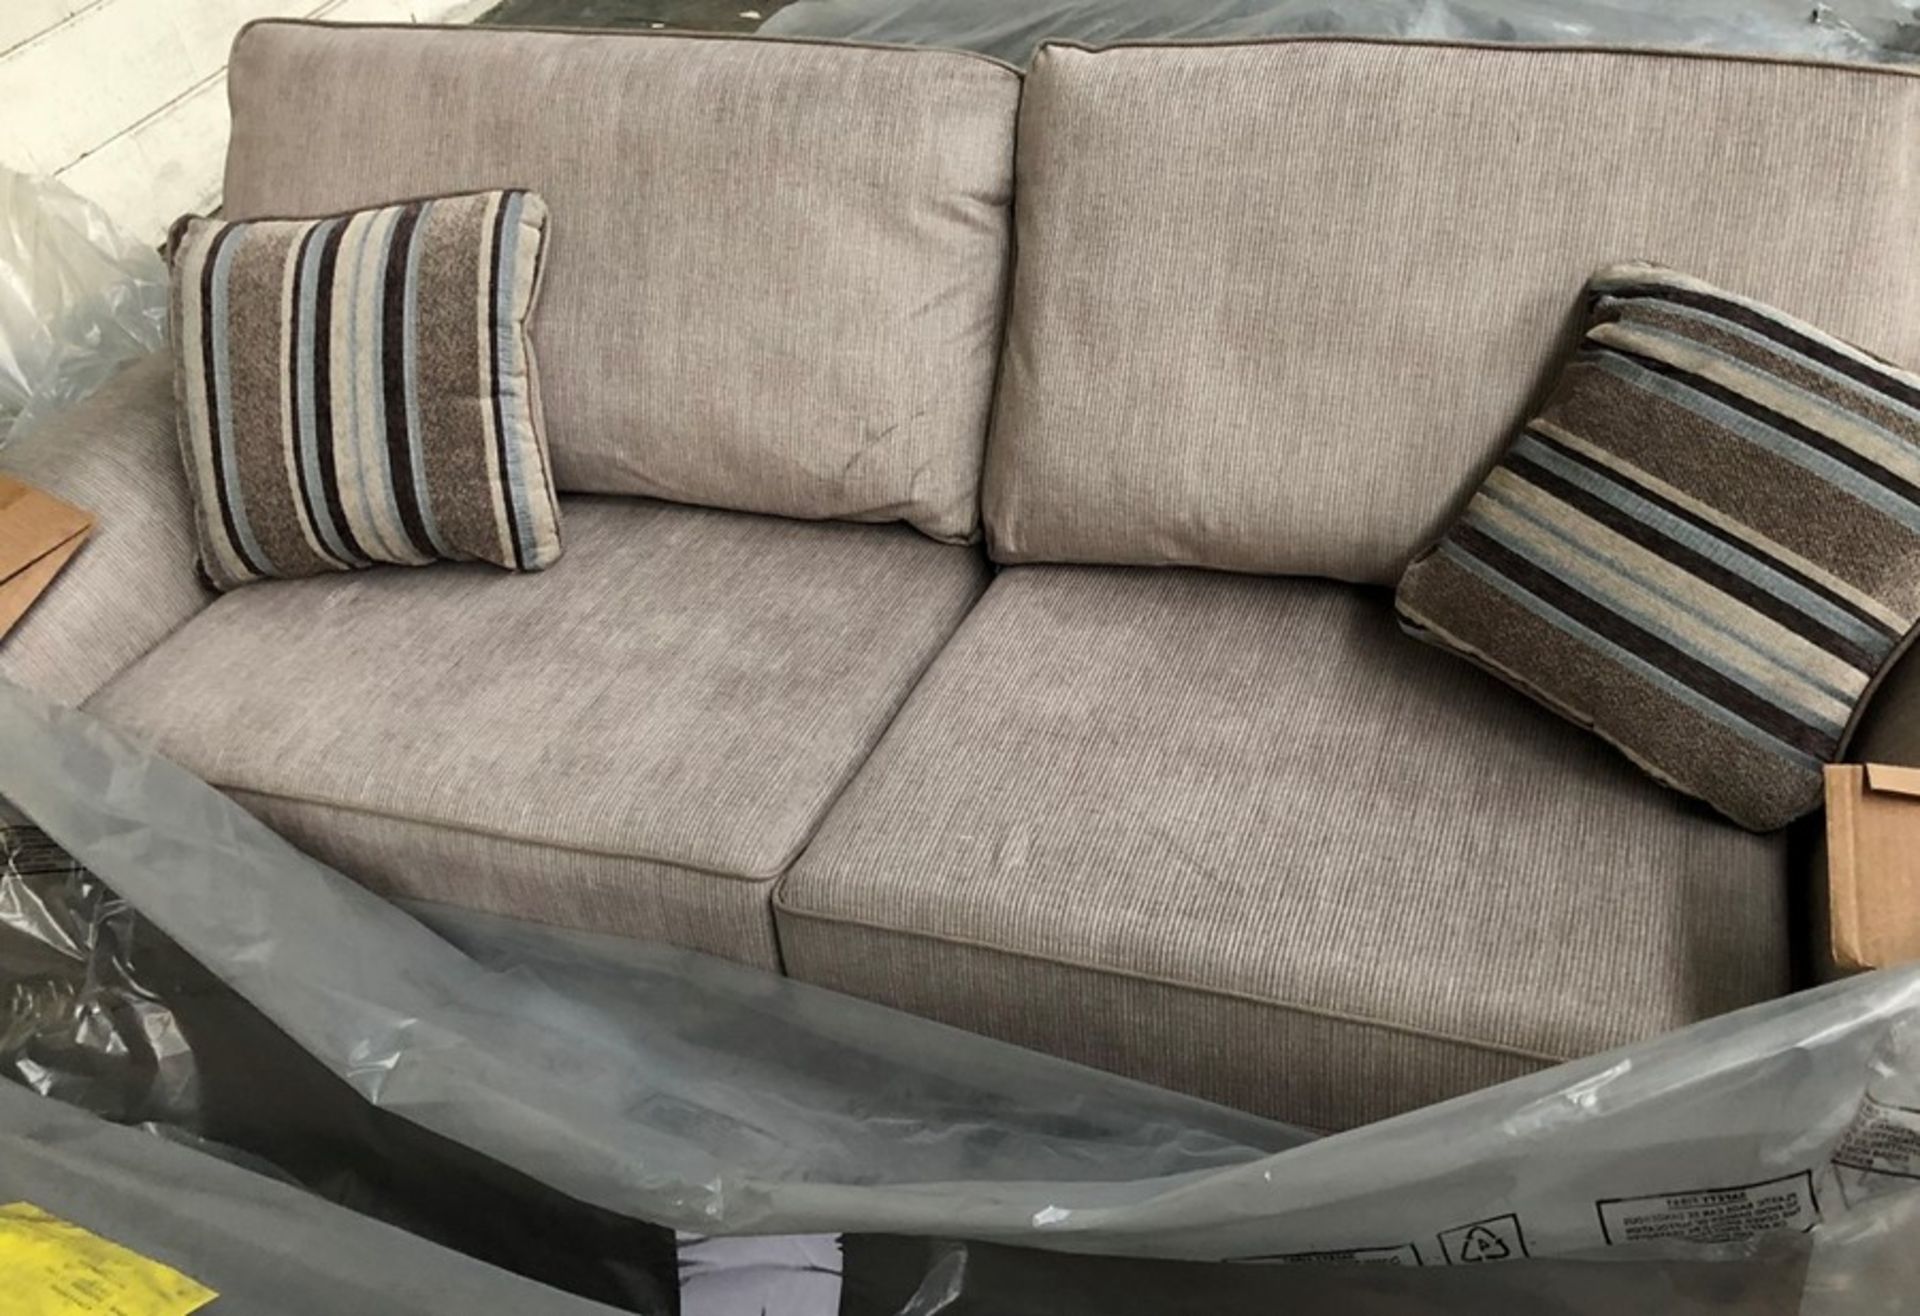 1 BRAND NEW BAGGED FABB SOFAS ROXY 3 SEATER SOFA IN TAUPE (VIEWING HIGHLY RECOMMENDED)